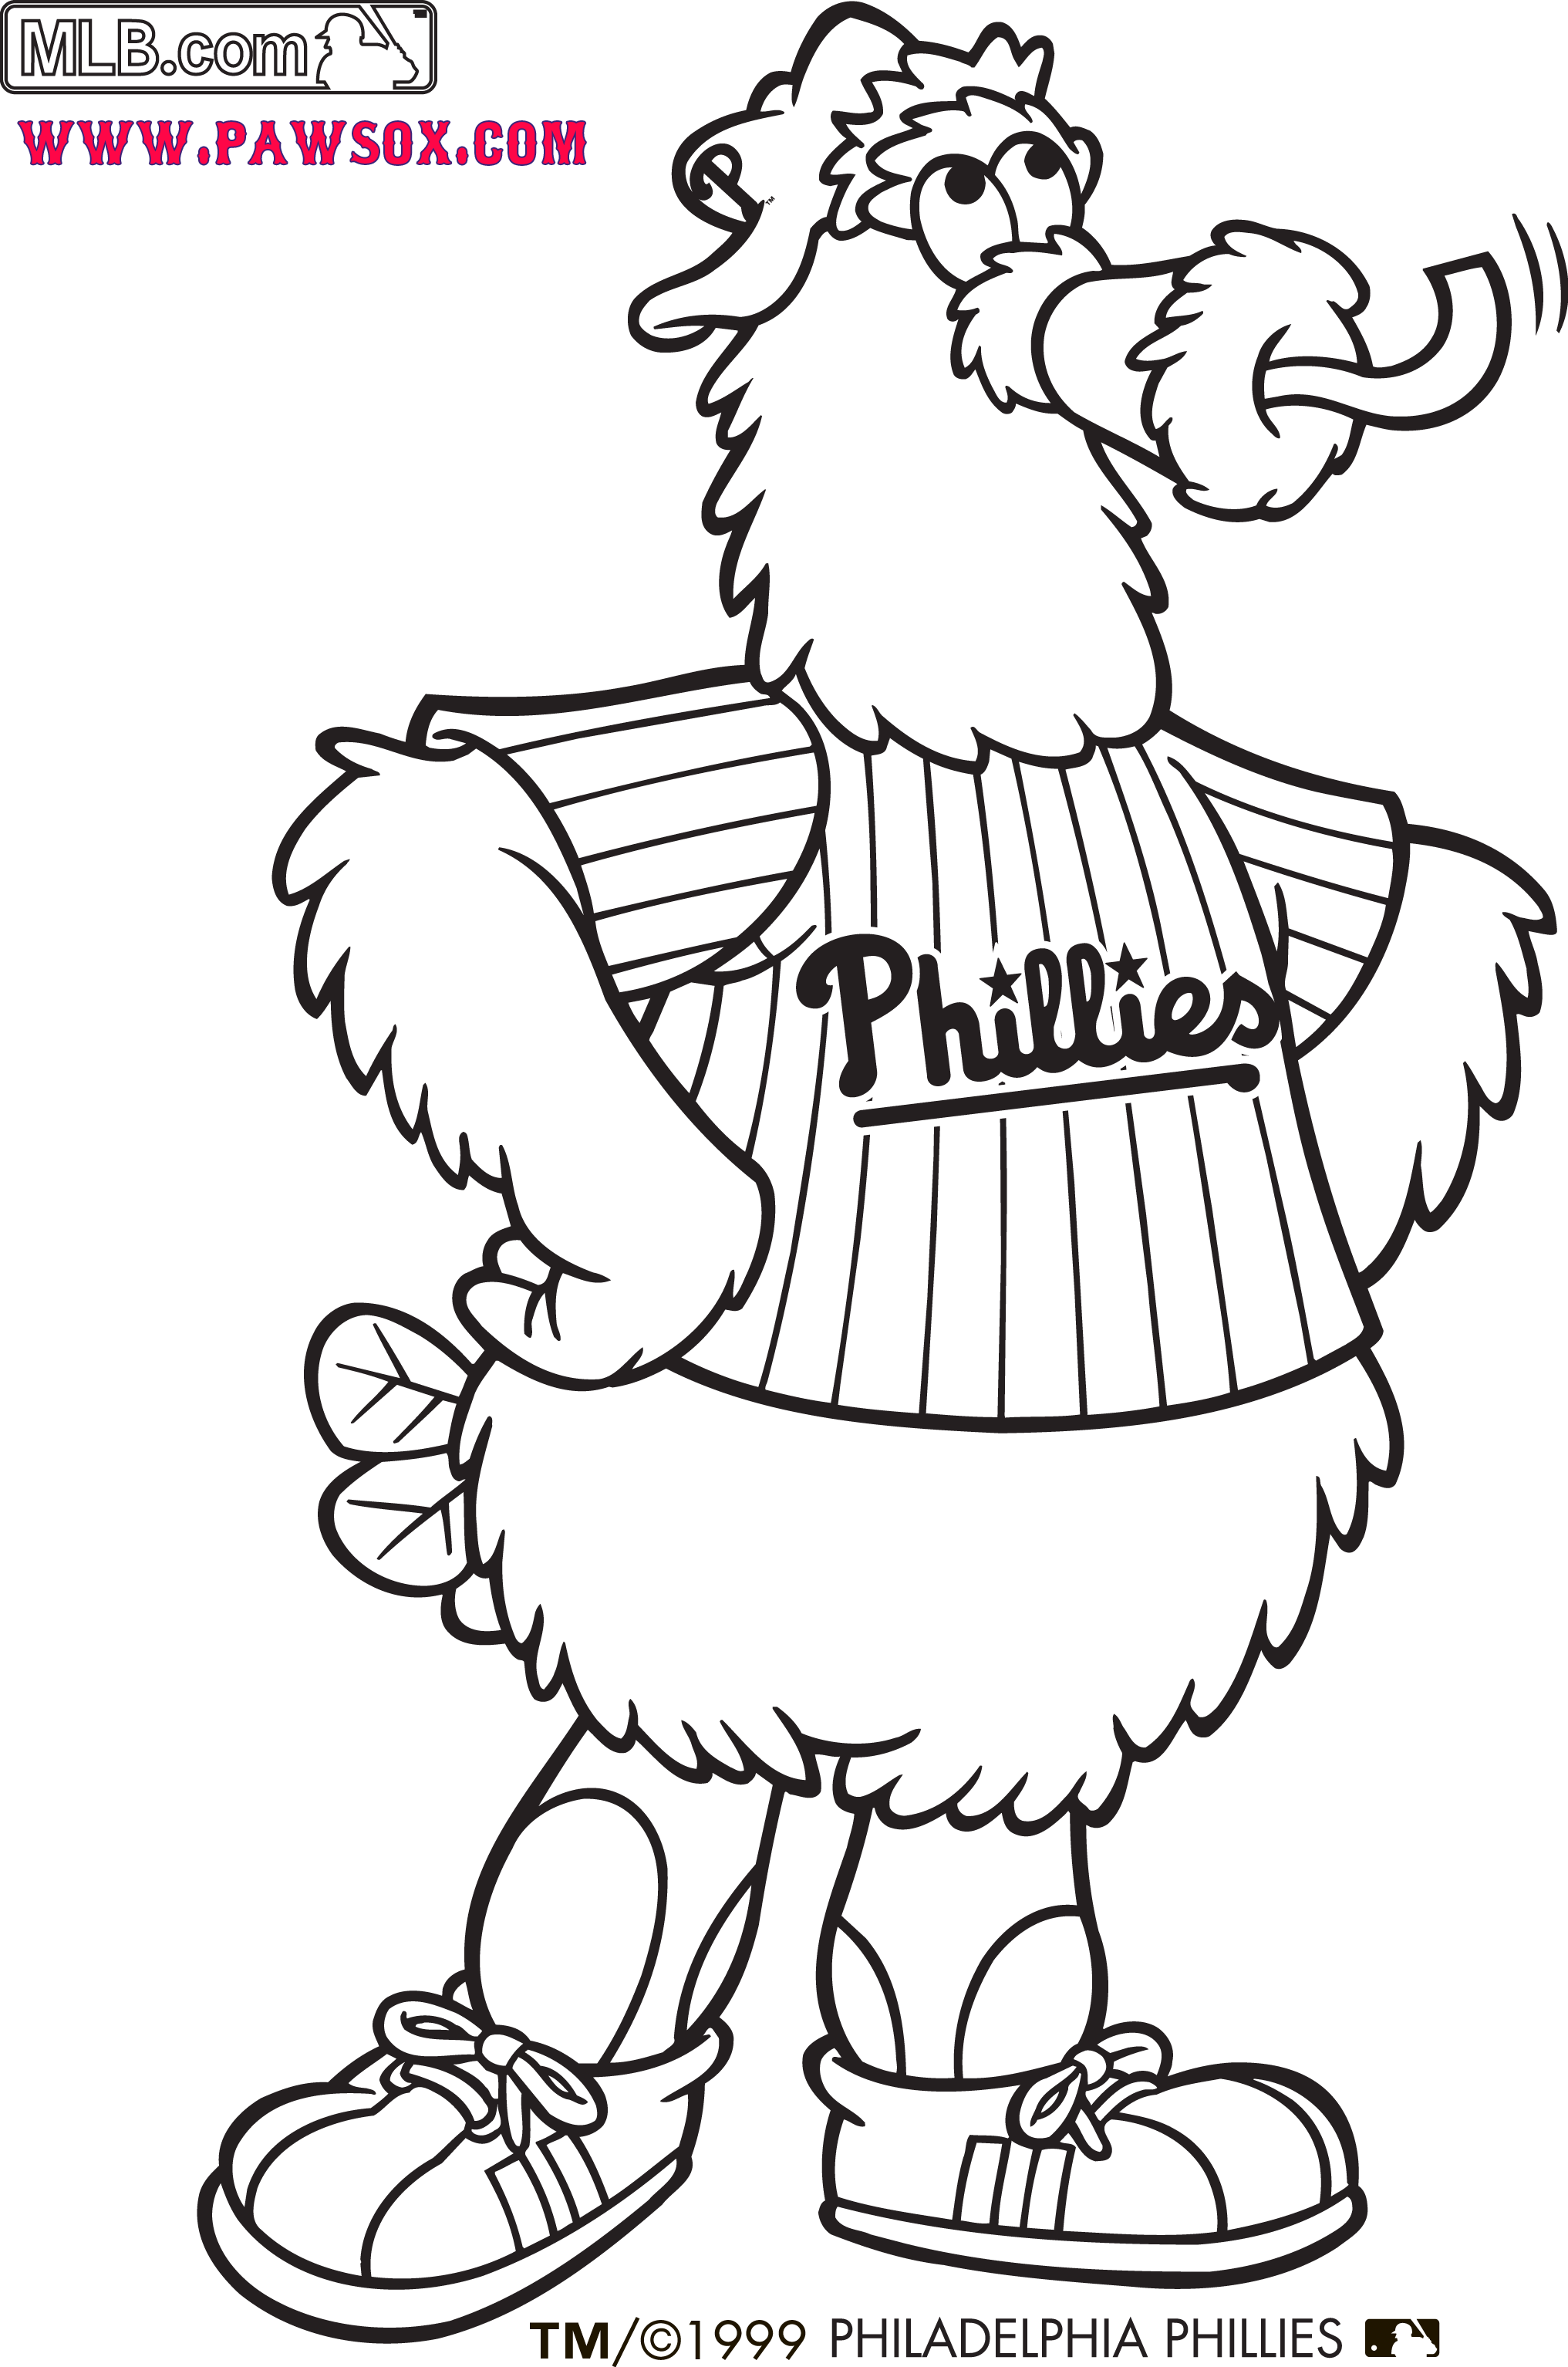 Free phillies phanatic coloring page download free phillies phanatic coloring page png images free cliparts on clipart library